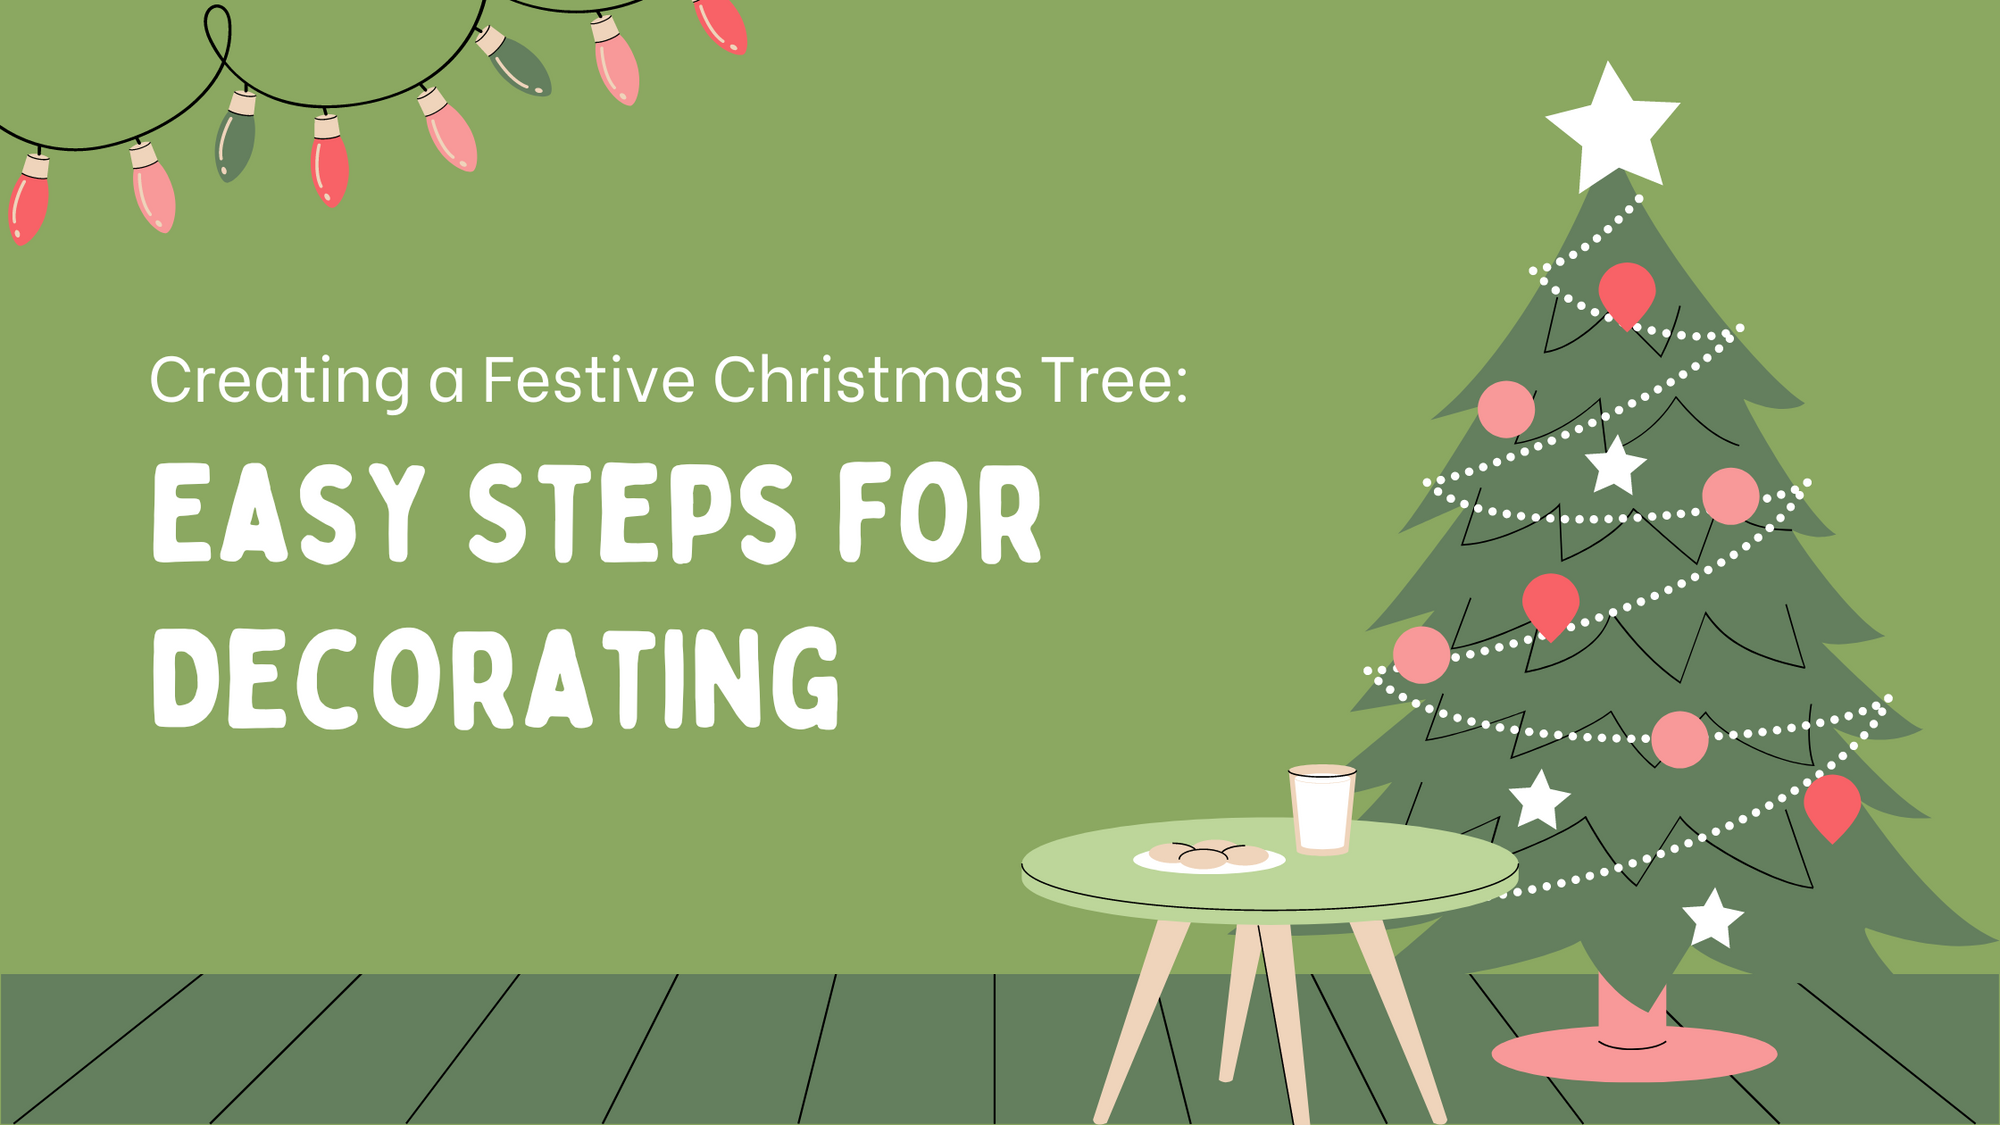 Creating a Festive Christmas Tree: Easy Steps for Decorating